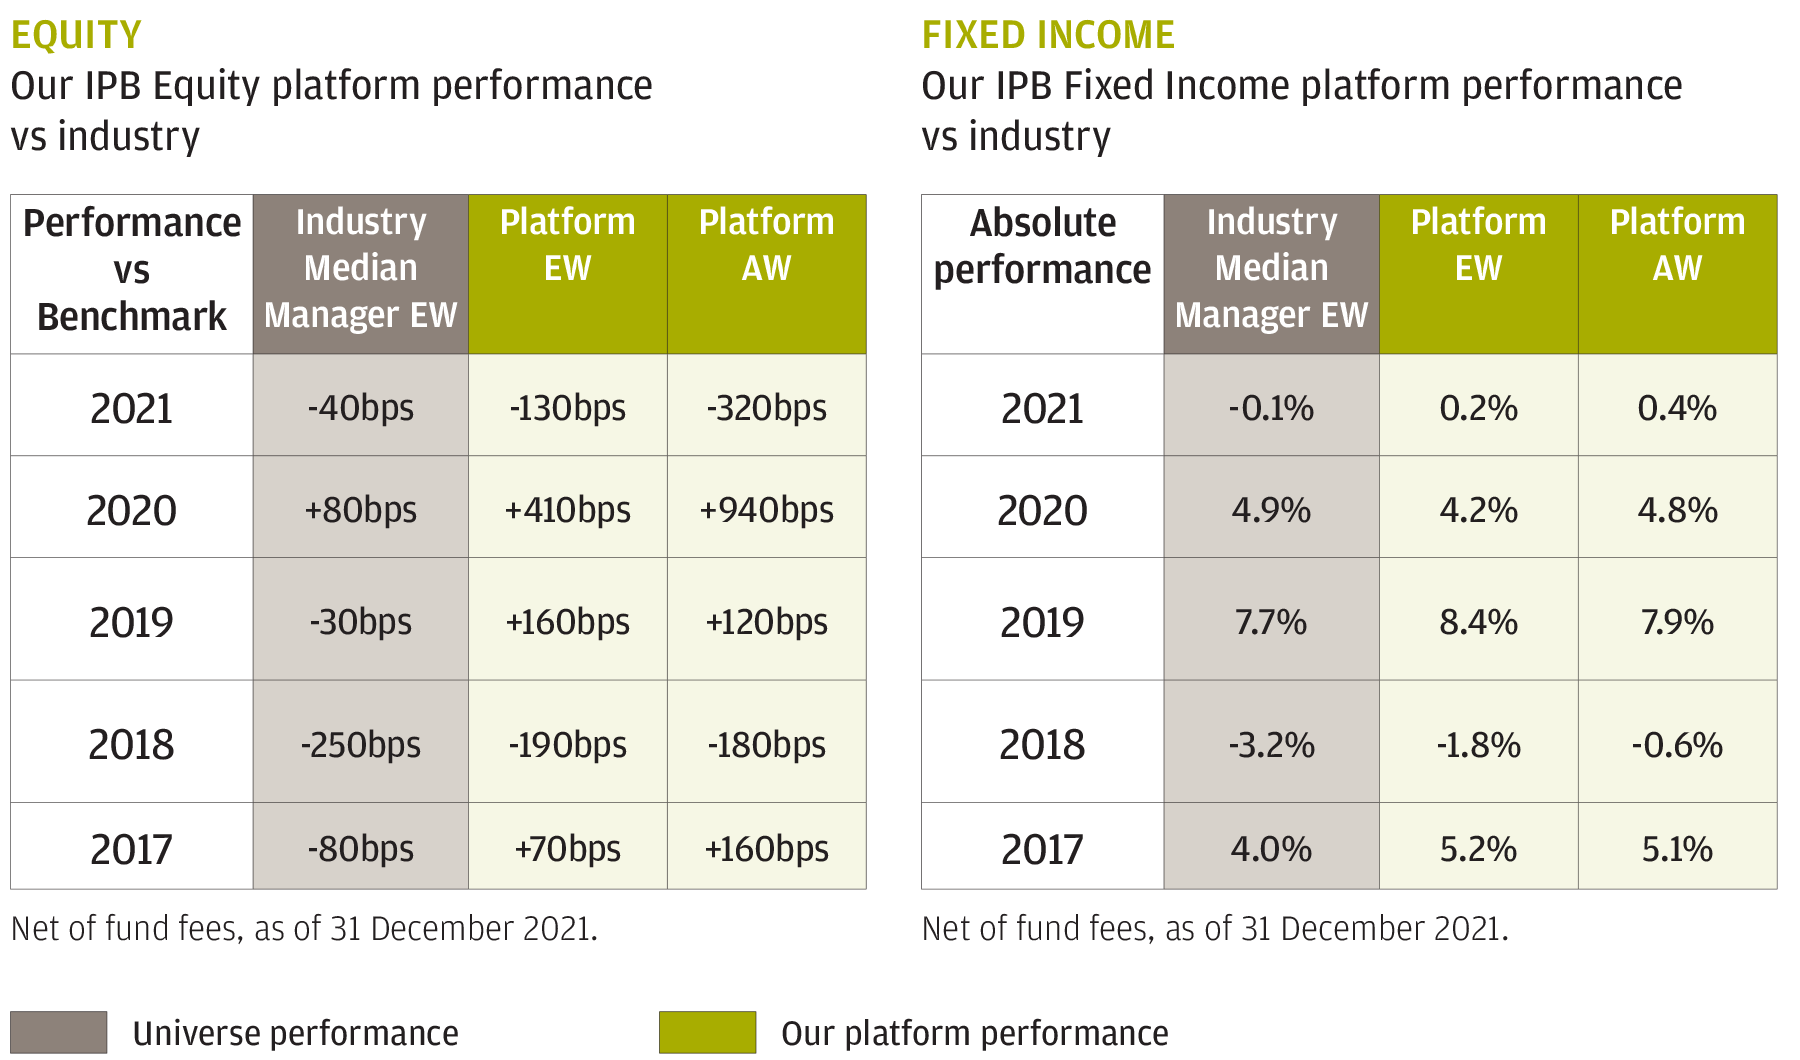 Left table shows our International Private Bank Equity Platform performance vs industry, net of managers fees. In 2021 the Industry median manager (Equal Weighted) was -40bps, our Equal Weighted platform -130bps and Asset Weighted platform =320bps. In 2020 the Industry median manager (Equal Weighted) beat its benchmark by +80bps, our Equal Weighted platform beat its benchmark by +410bps and Asset Weighted platform beat by +940bps. In 2019 the Industry median manager (Equal Weighted) underperformed its benchmark by -30bps, our Equal Weighted platform beat its benchmark by +160bps and Asset Weighted platform beat by +120bps. In 2018 the Industry median manager (Equal Weighted) underperformed its benchmark by -250bps, our Equal Weighted platform performance underperformed its benchmark by -190bps and Asset Weighted platform performance underperformed by -180bps, and lastly, in 2017 the Industry median manager (Equal Weighted) underperformed its benchmark by -80bps, our Equal Weighted platform performance beat its benchmark by +70bps and Asset Weighted platform performance beat by +160bps. On the fixed income table (right), the 2021 Industry median manager (Equal Weighted) was -0.1%, while our Equal Weighted platform performance was 0.2% and Asset Weighted 0.4%. The 2020 Industry median manager (Equal Weighted) was 4.9%, while our Equal Weighted platform performance was 4.2% and Asset Weighted 4.8%. The 2019 Industry median manager (Equal Weighted) was 7.7%, while our Equal Weighted platform performance was 8.4% and Asset Weighted 7.9%. The 2018 Industry median manager (Equal Weighted) was -3.2%, while our Equal Weighted platform performance was -1.8% and Asset Weighted -0.6%, and lastly in 2017, the Industry median manager (Equal Weighted) was -4%, while our Equal Weighted platform performance was 5.2% and Asset Weighted 5.1%.